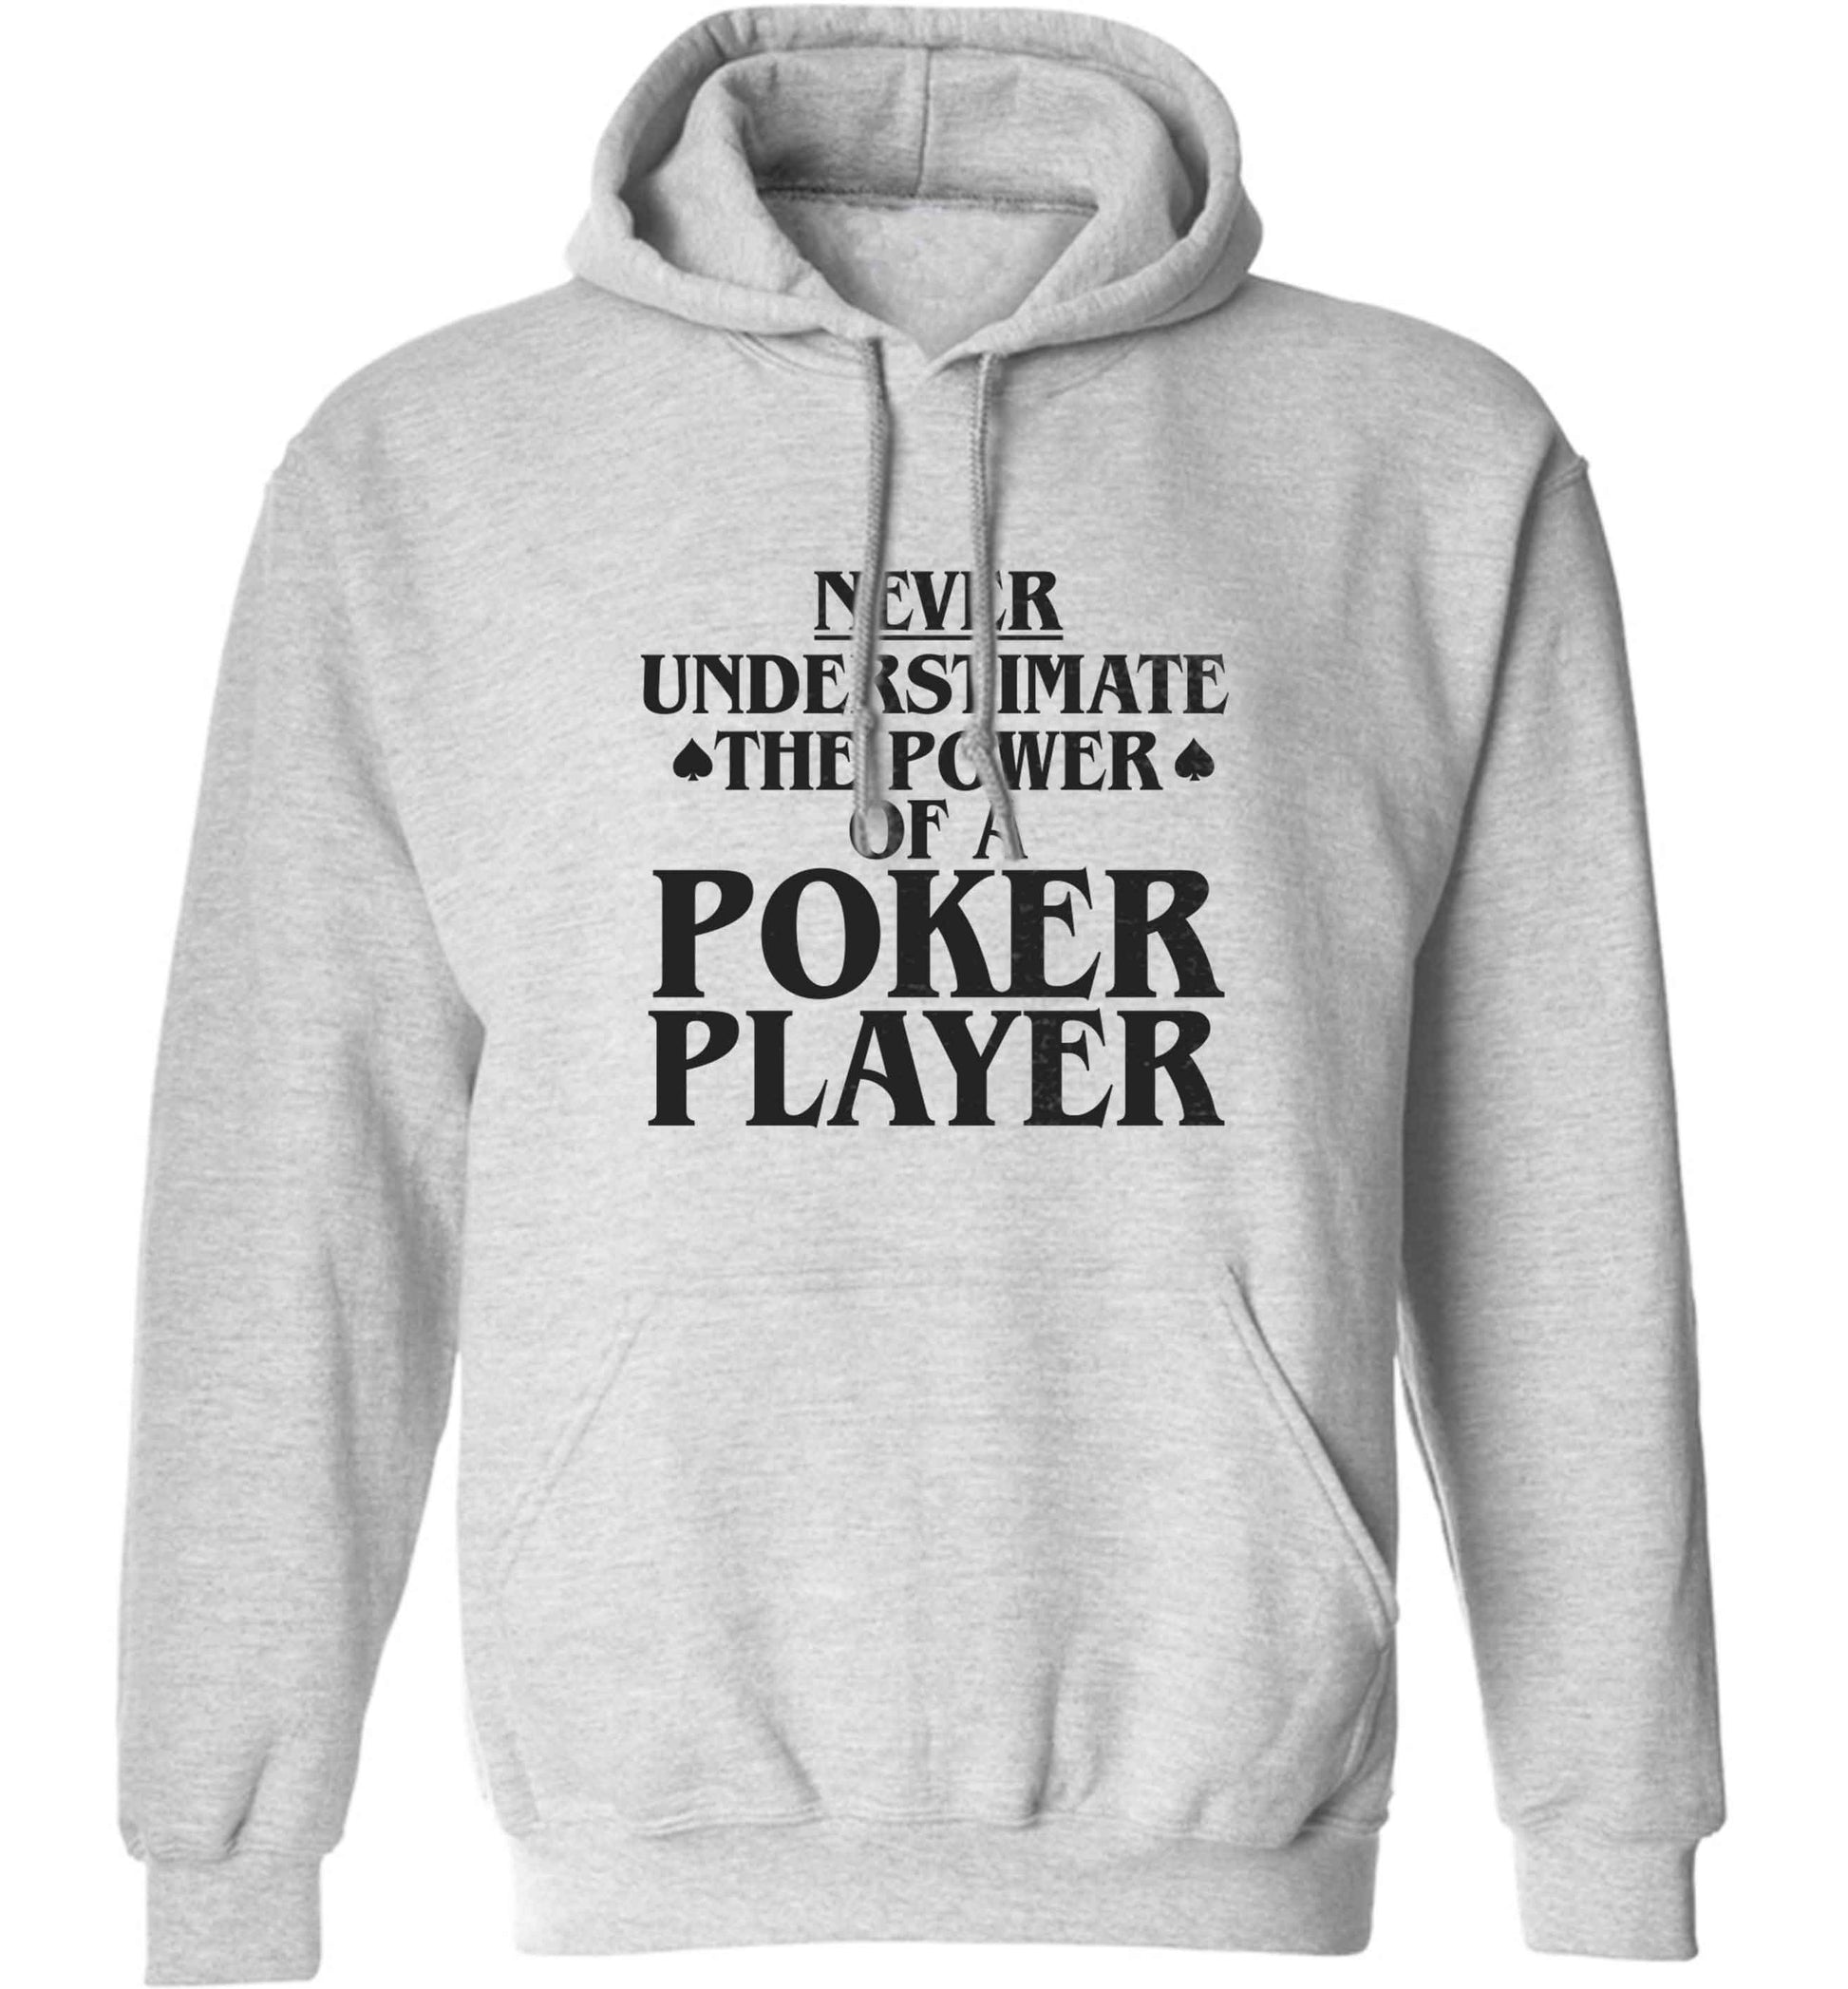 Never understimate the power of a poker player adults unisex grey hoodie 2XL